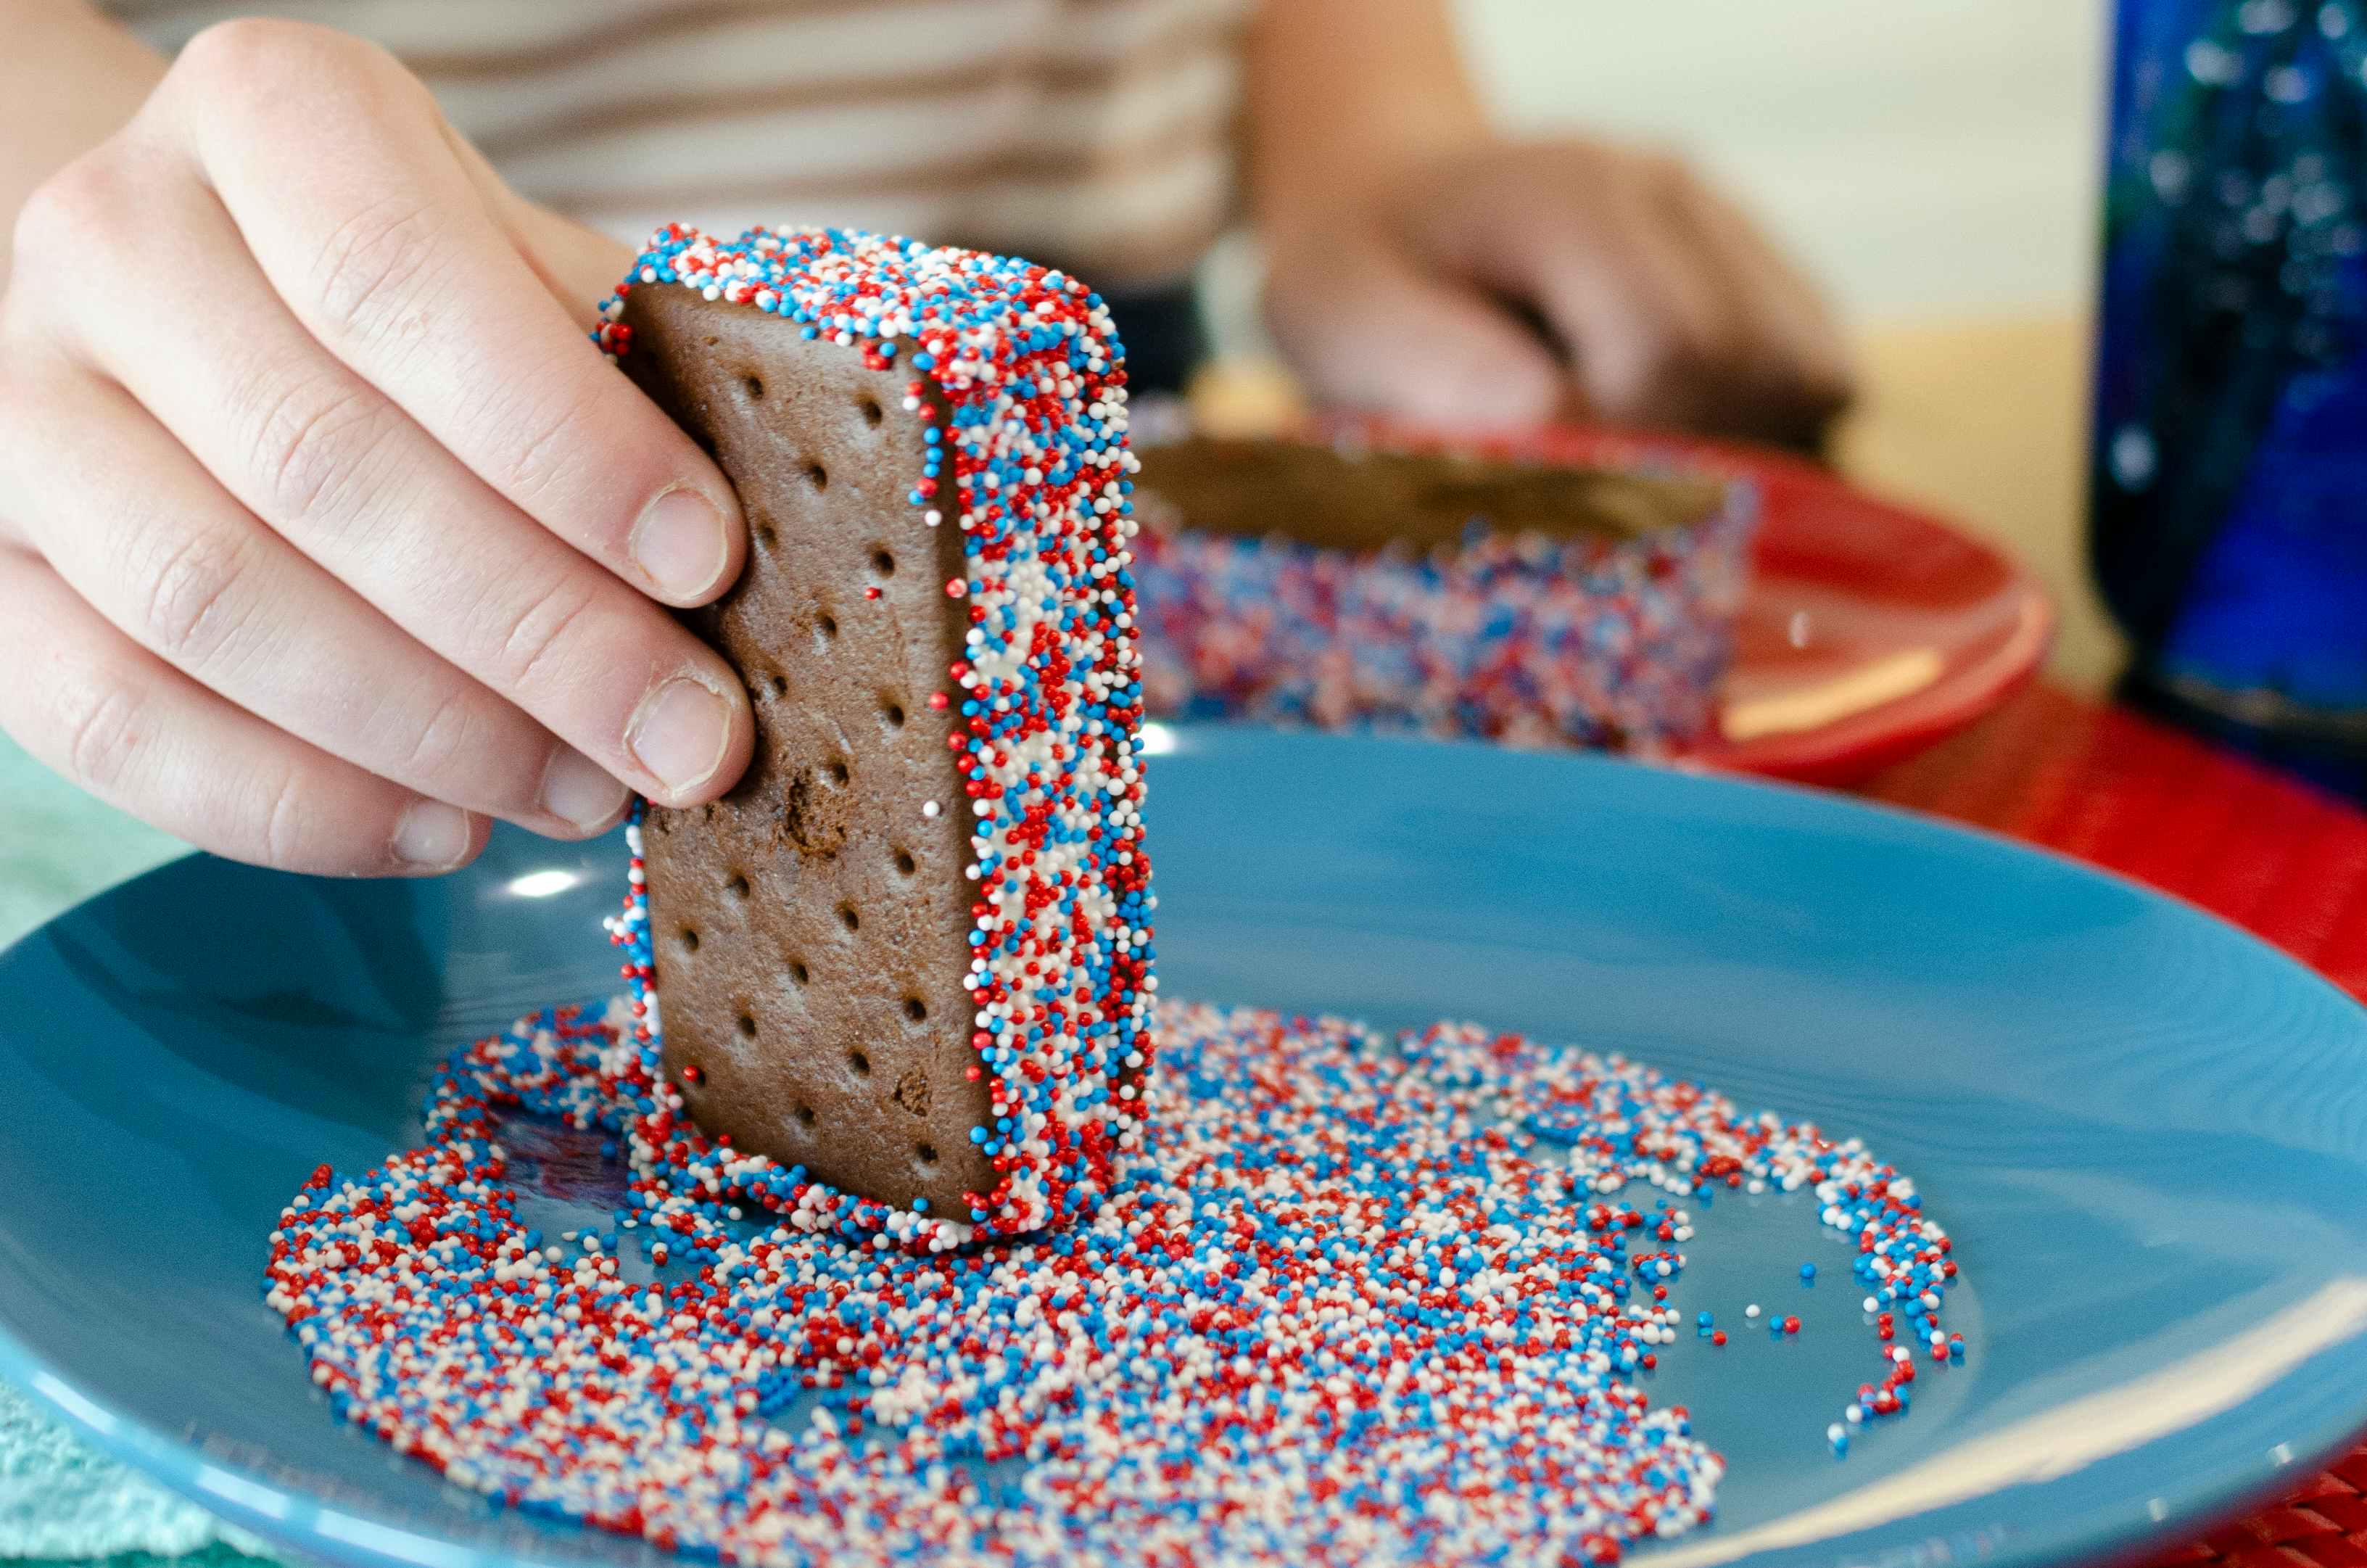 A person dipping an ice cream sandwich in red, white, and blue sprinkles.